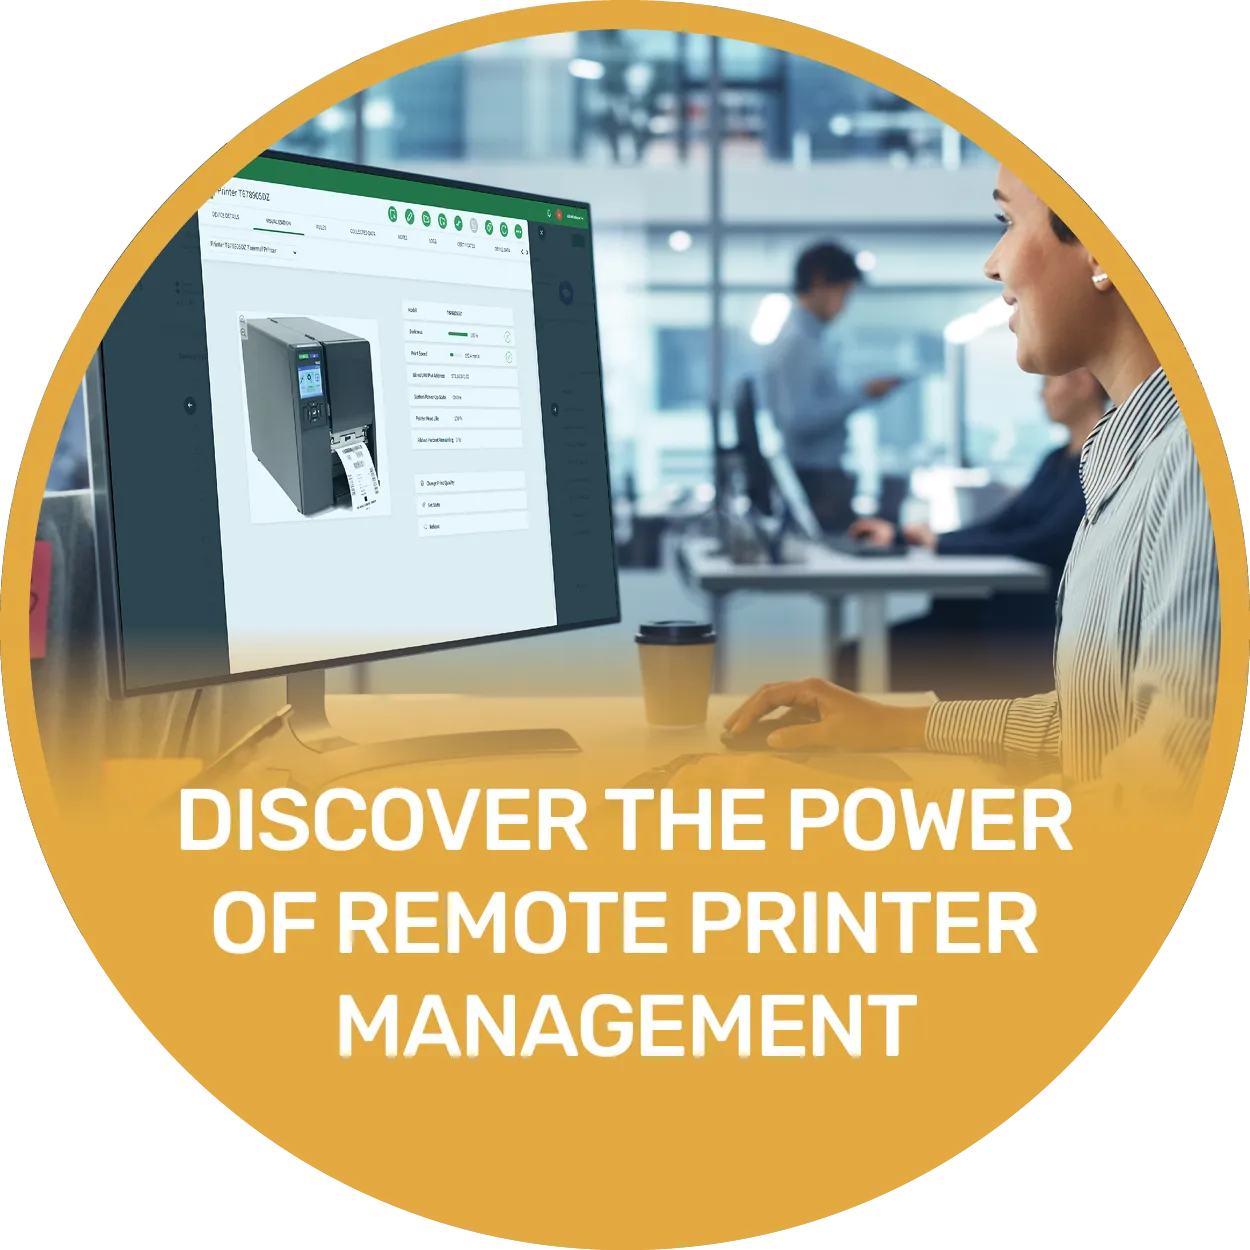 Discover the power of remote printer management